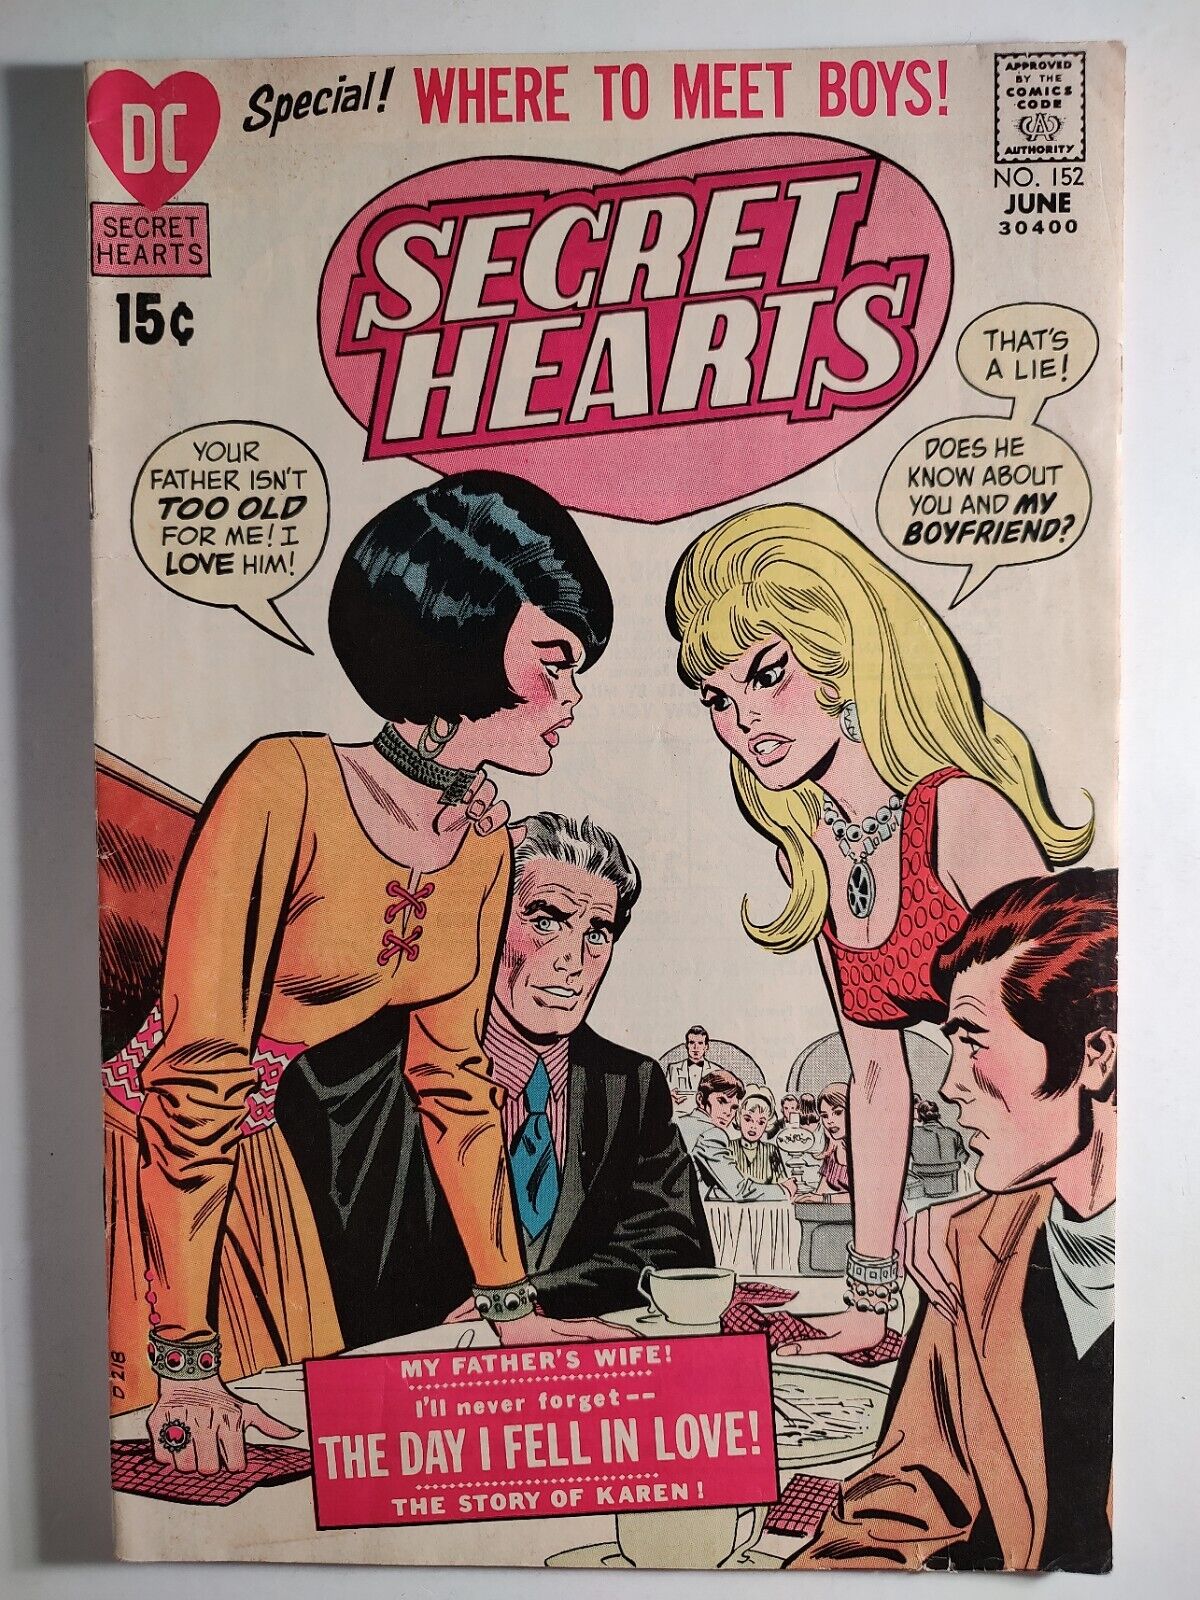 Secret Hearts #152, St. VG/FN 5.0, DC 1971, Next to Last Issue